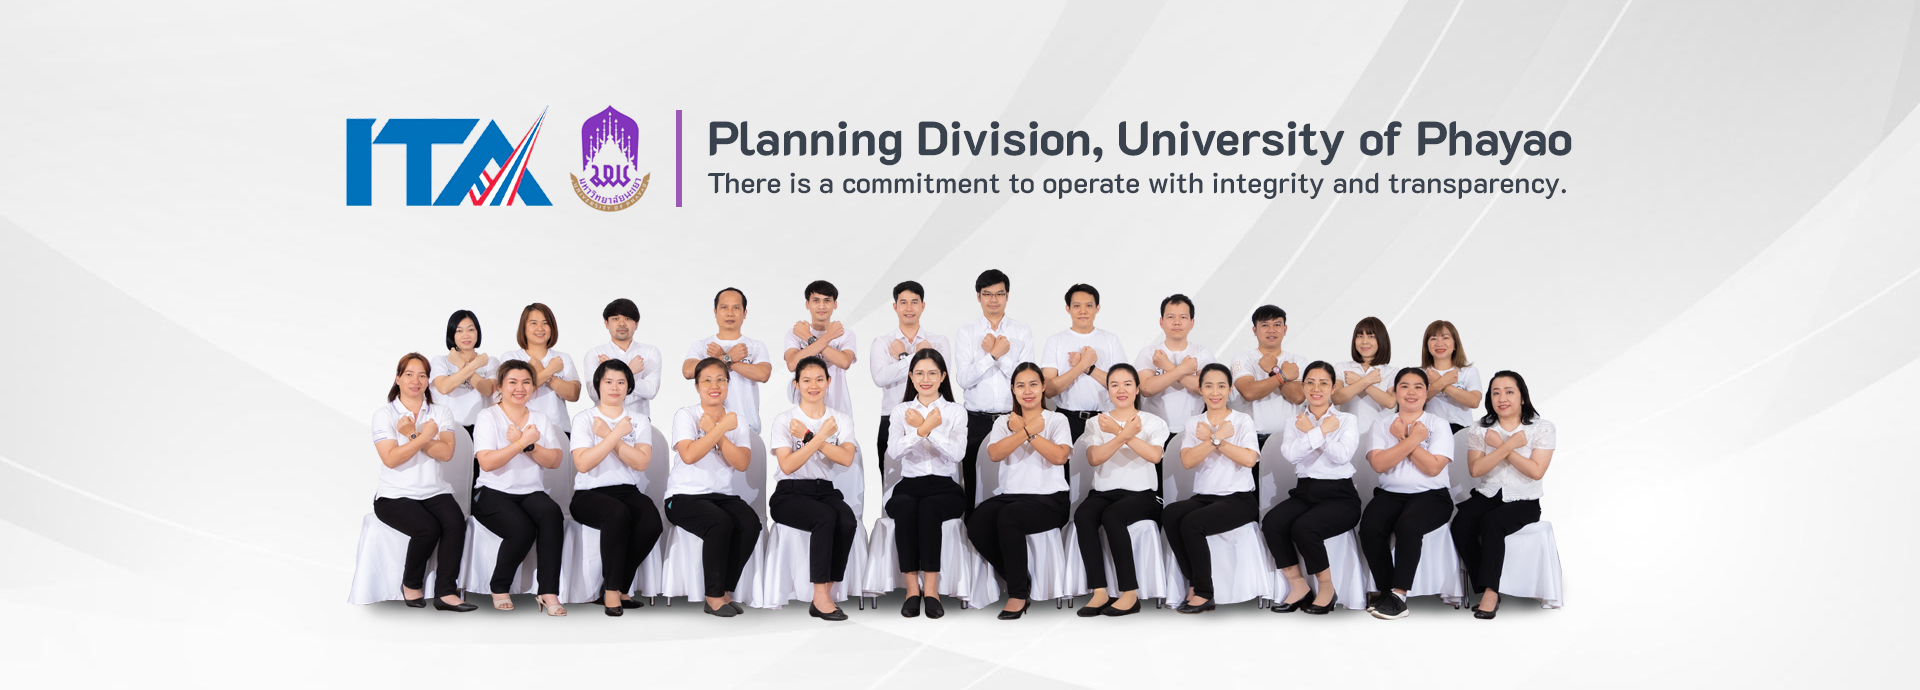 Planning Division - University of Phayao